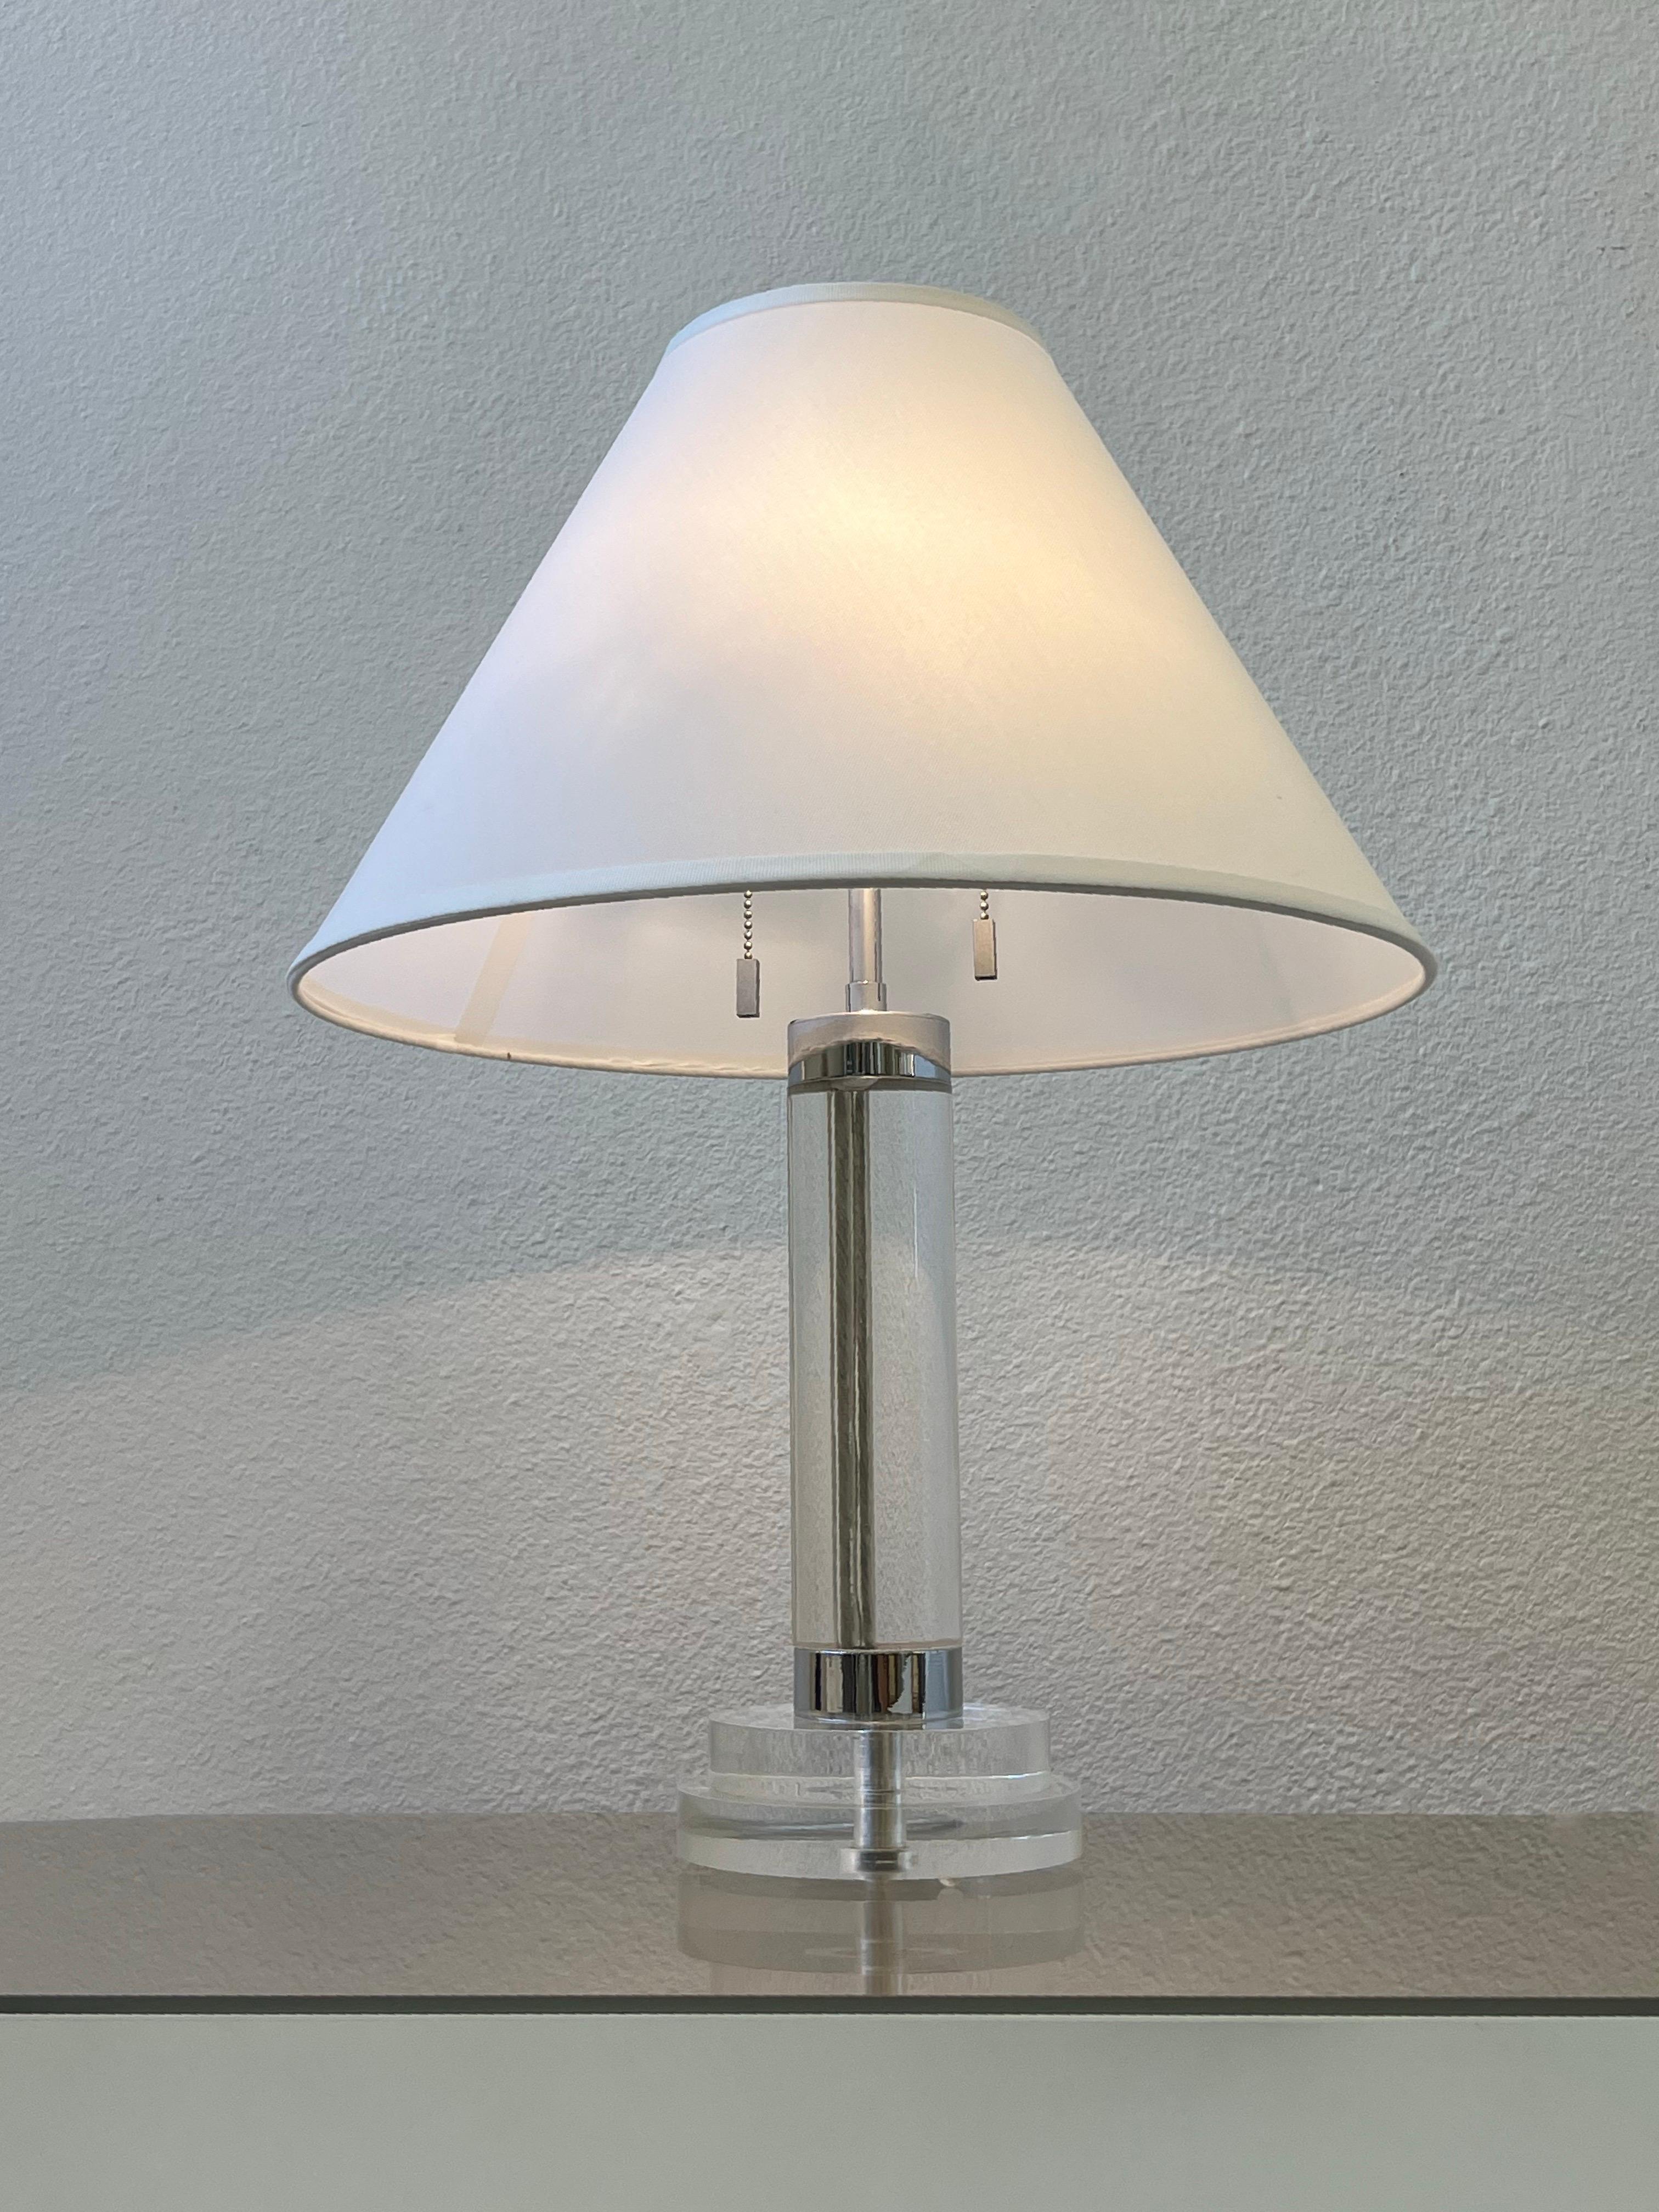 1980s Clear acrylic and polish chrome table lamp by Karl Springer. 

Newly rewired and new shade. 
It takes two 75w Max Edison lightbulbs.

Measurements: 17” Diameter, 6” Diameter Base, 22.75” High.